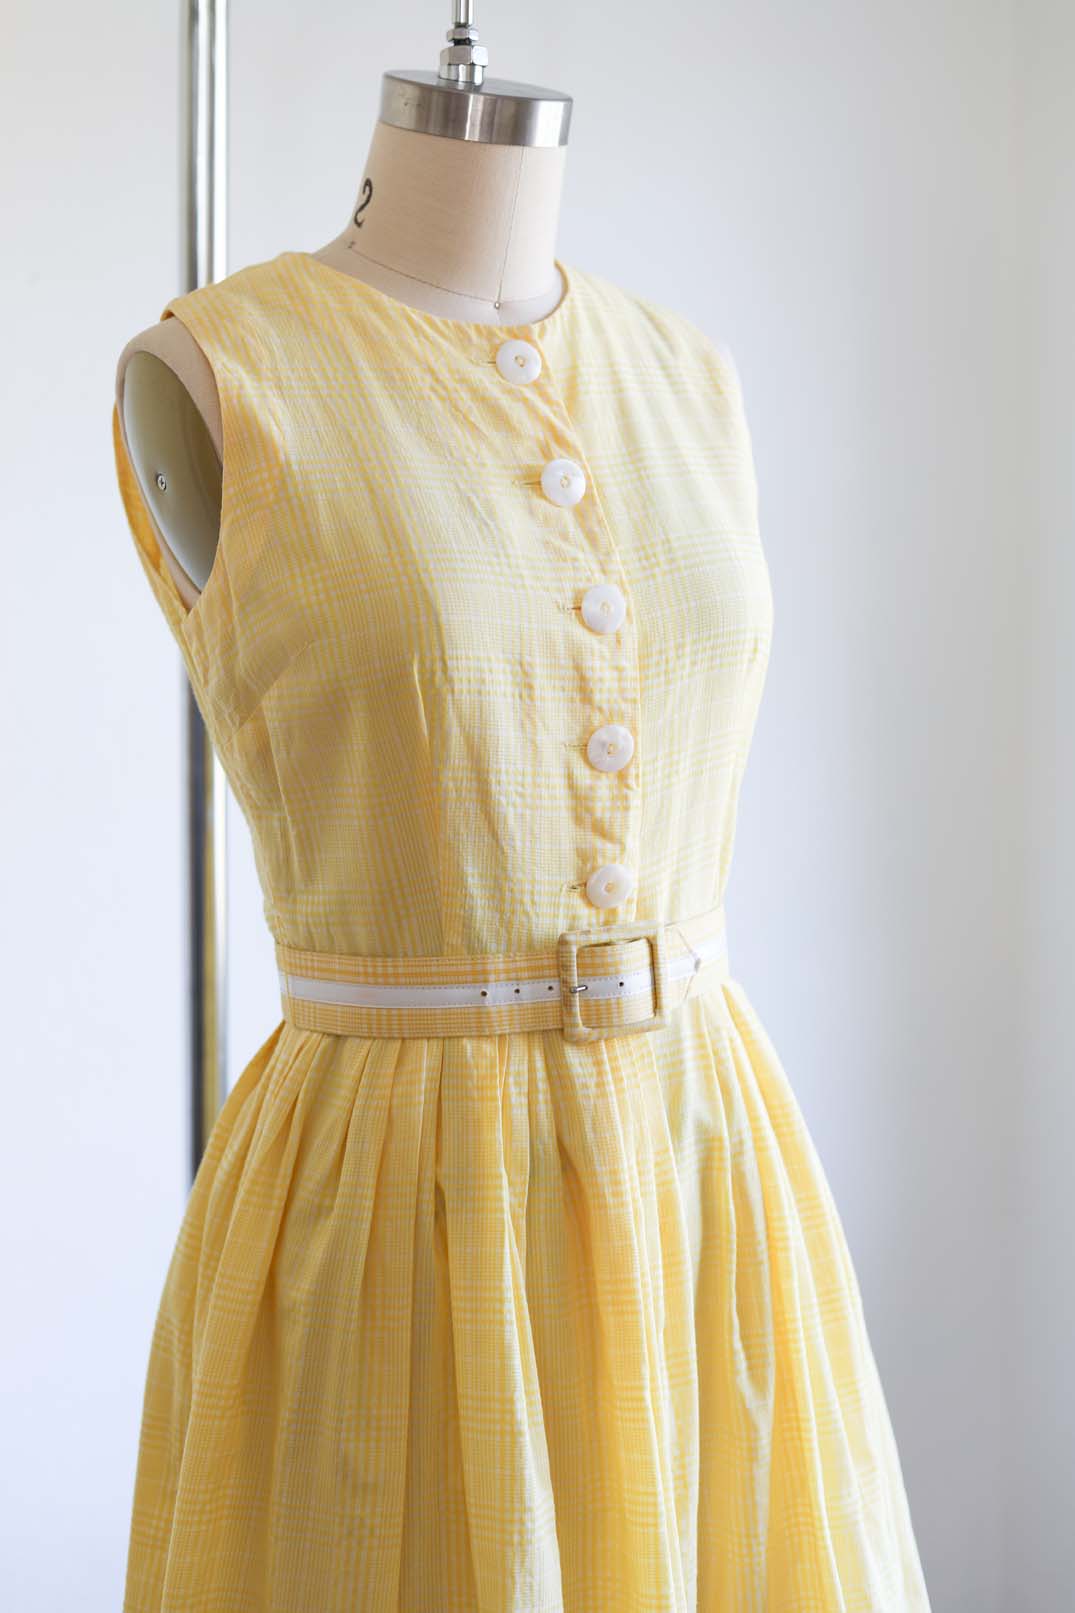 Vintage 1950s RARE Culottes Jumpsuit Dress - RARE Yellow Plaid Cotton Jerry Gilden Looks Like a Full-Skirted Dress but Actually a ROMPER Size XS